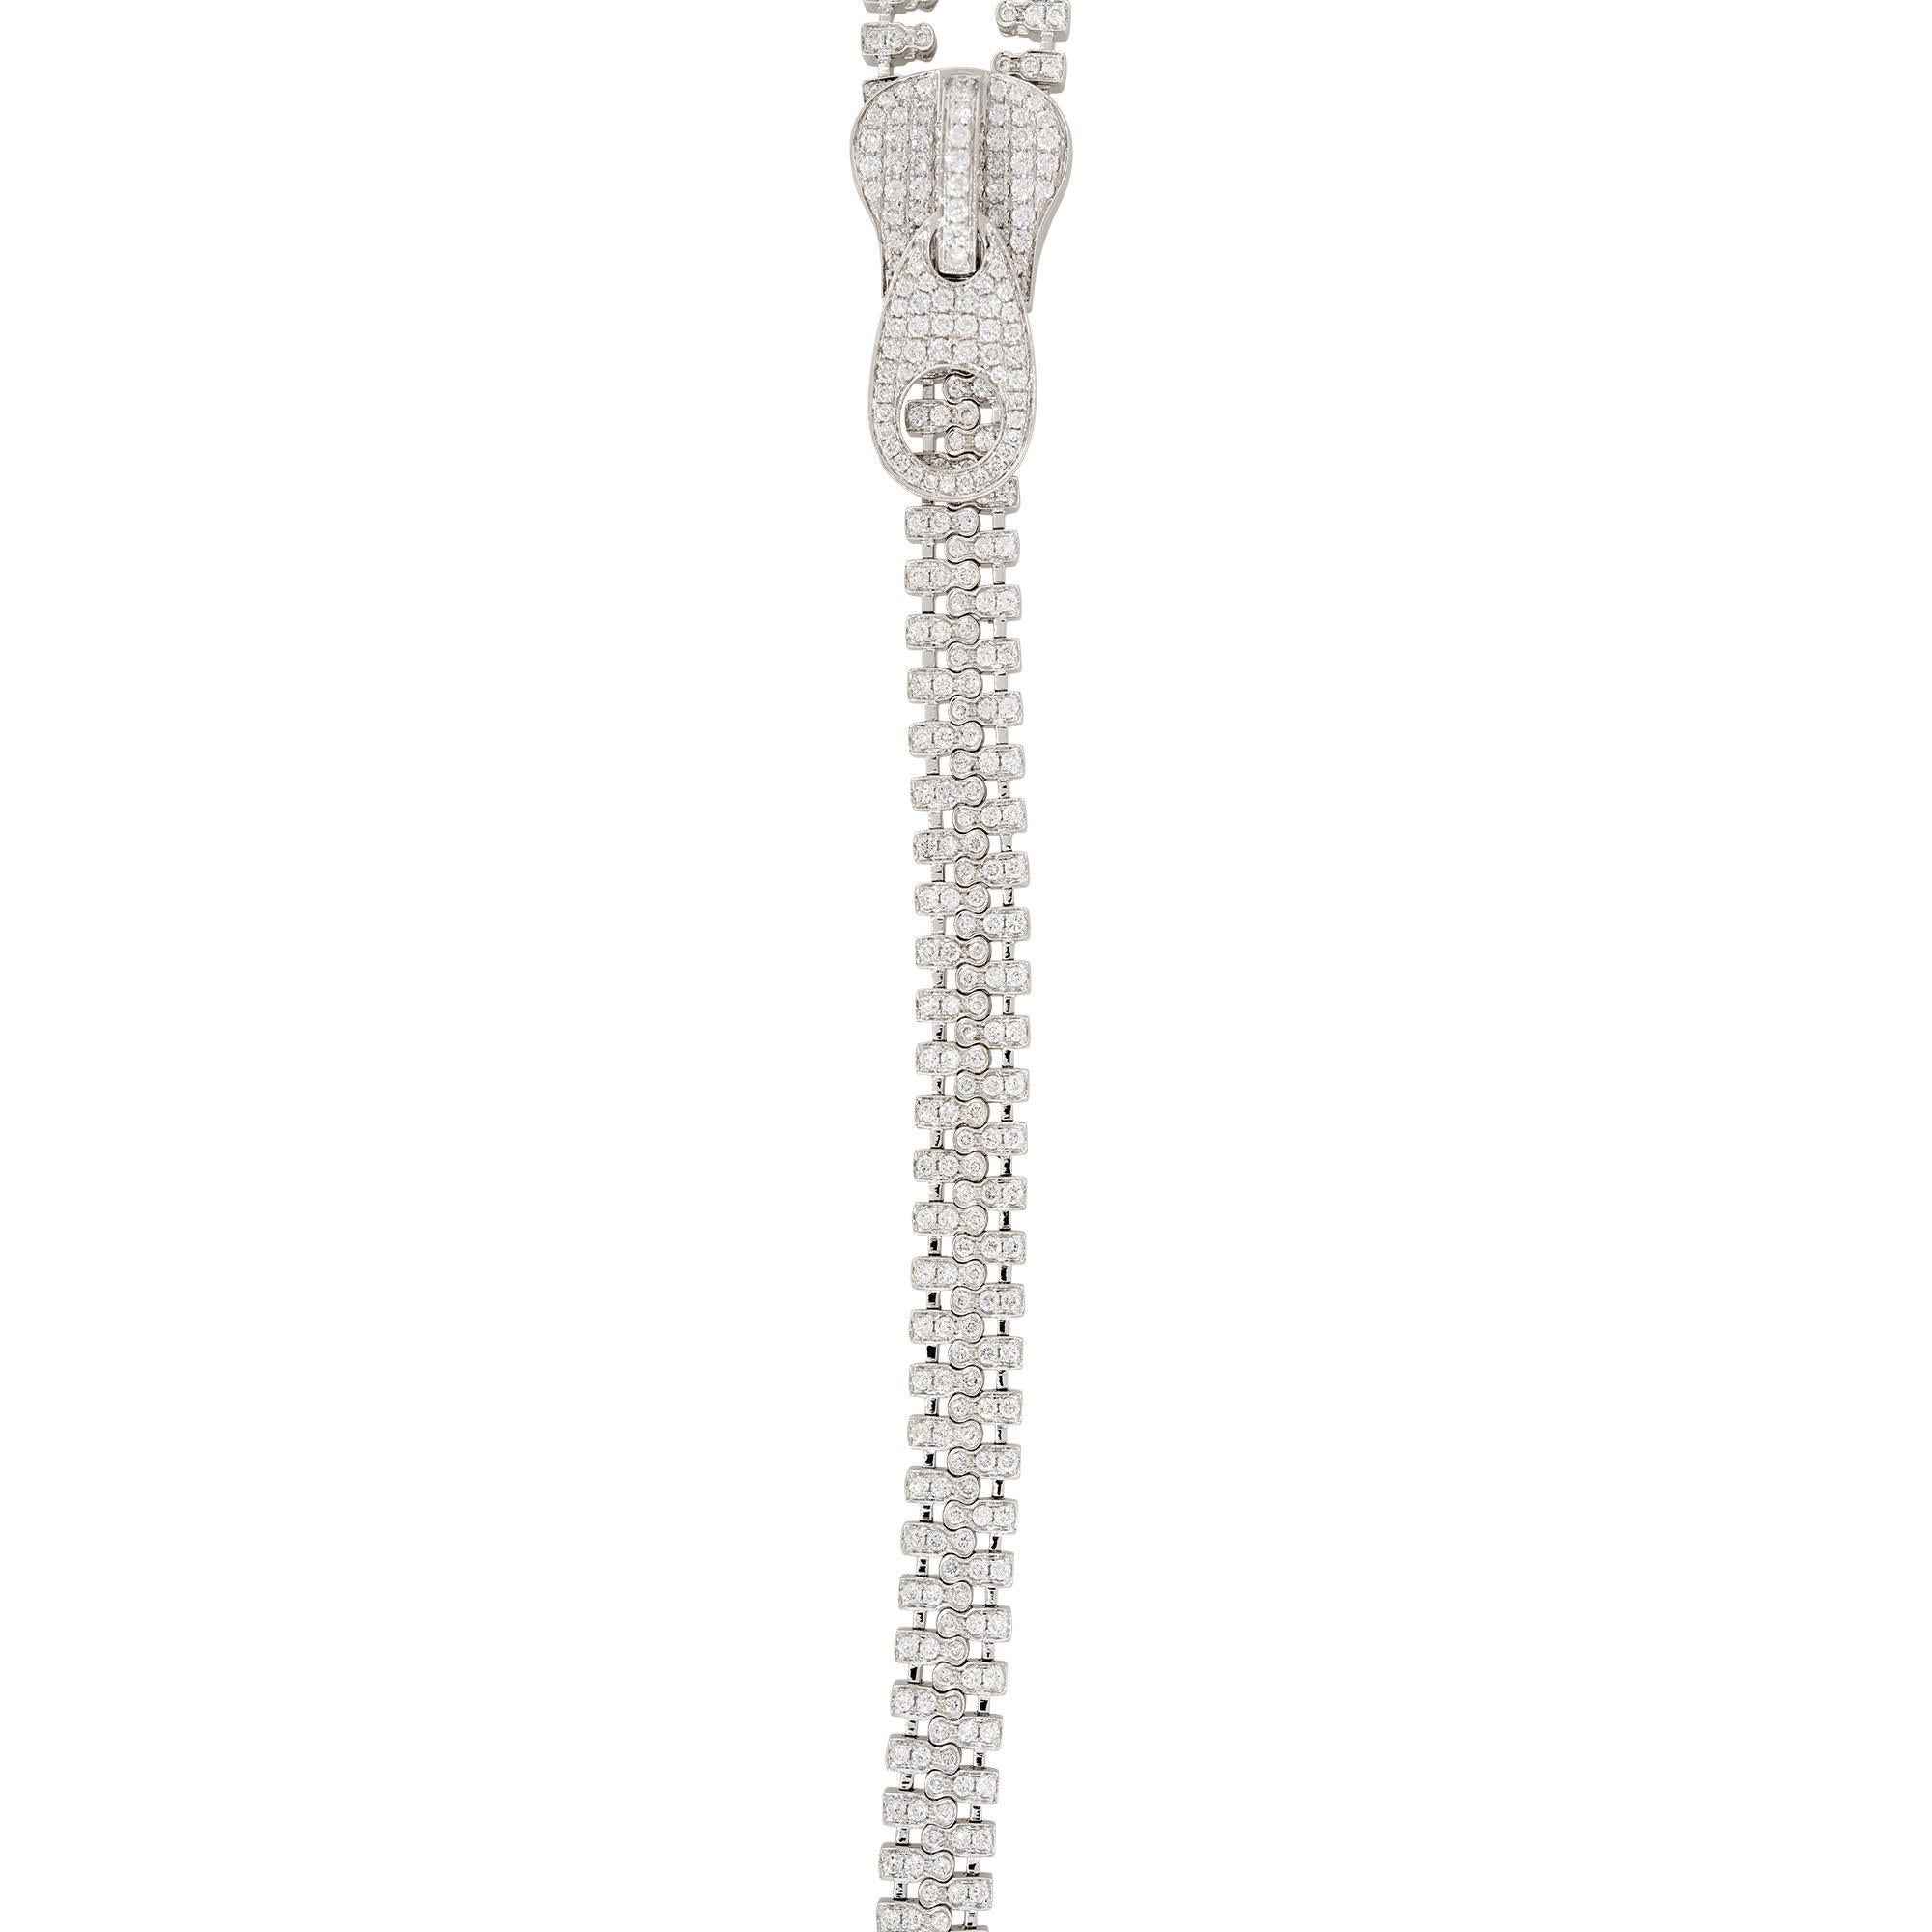 18k White Gold 7.48ctw Diamond Extra Long Functional Zipper Necklace

Product: Functional Diamond Zipper Necklace
Material: 18 Karat White Gold
Diamond Details: There are approximately 7.48 carats of Pave set, Round Brilliant cut diamonds. There are